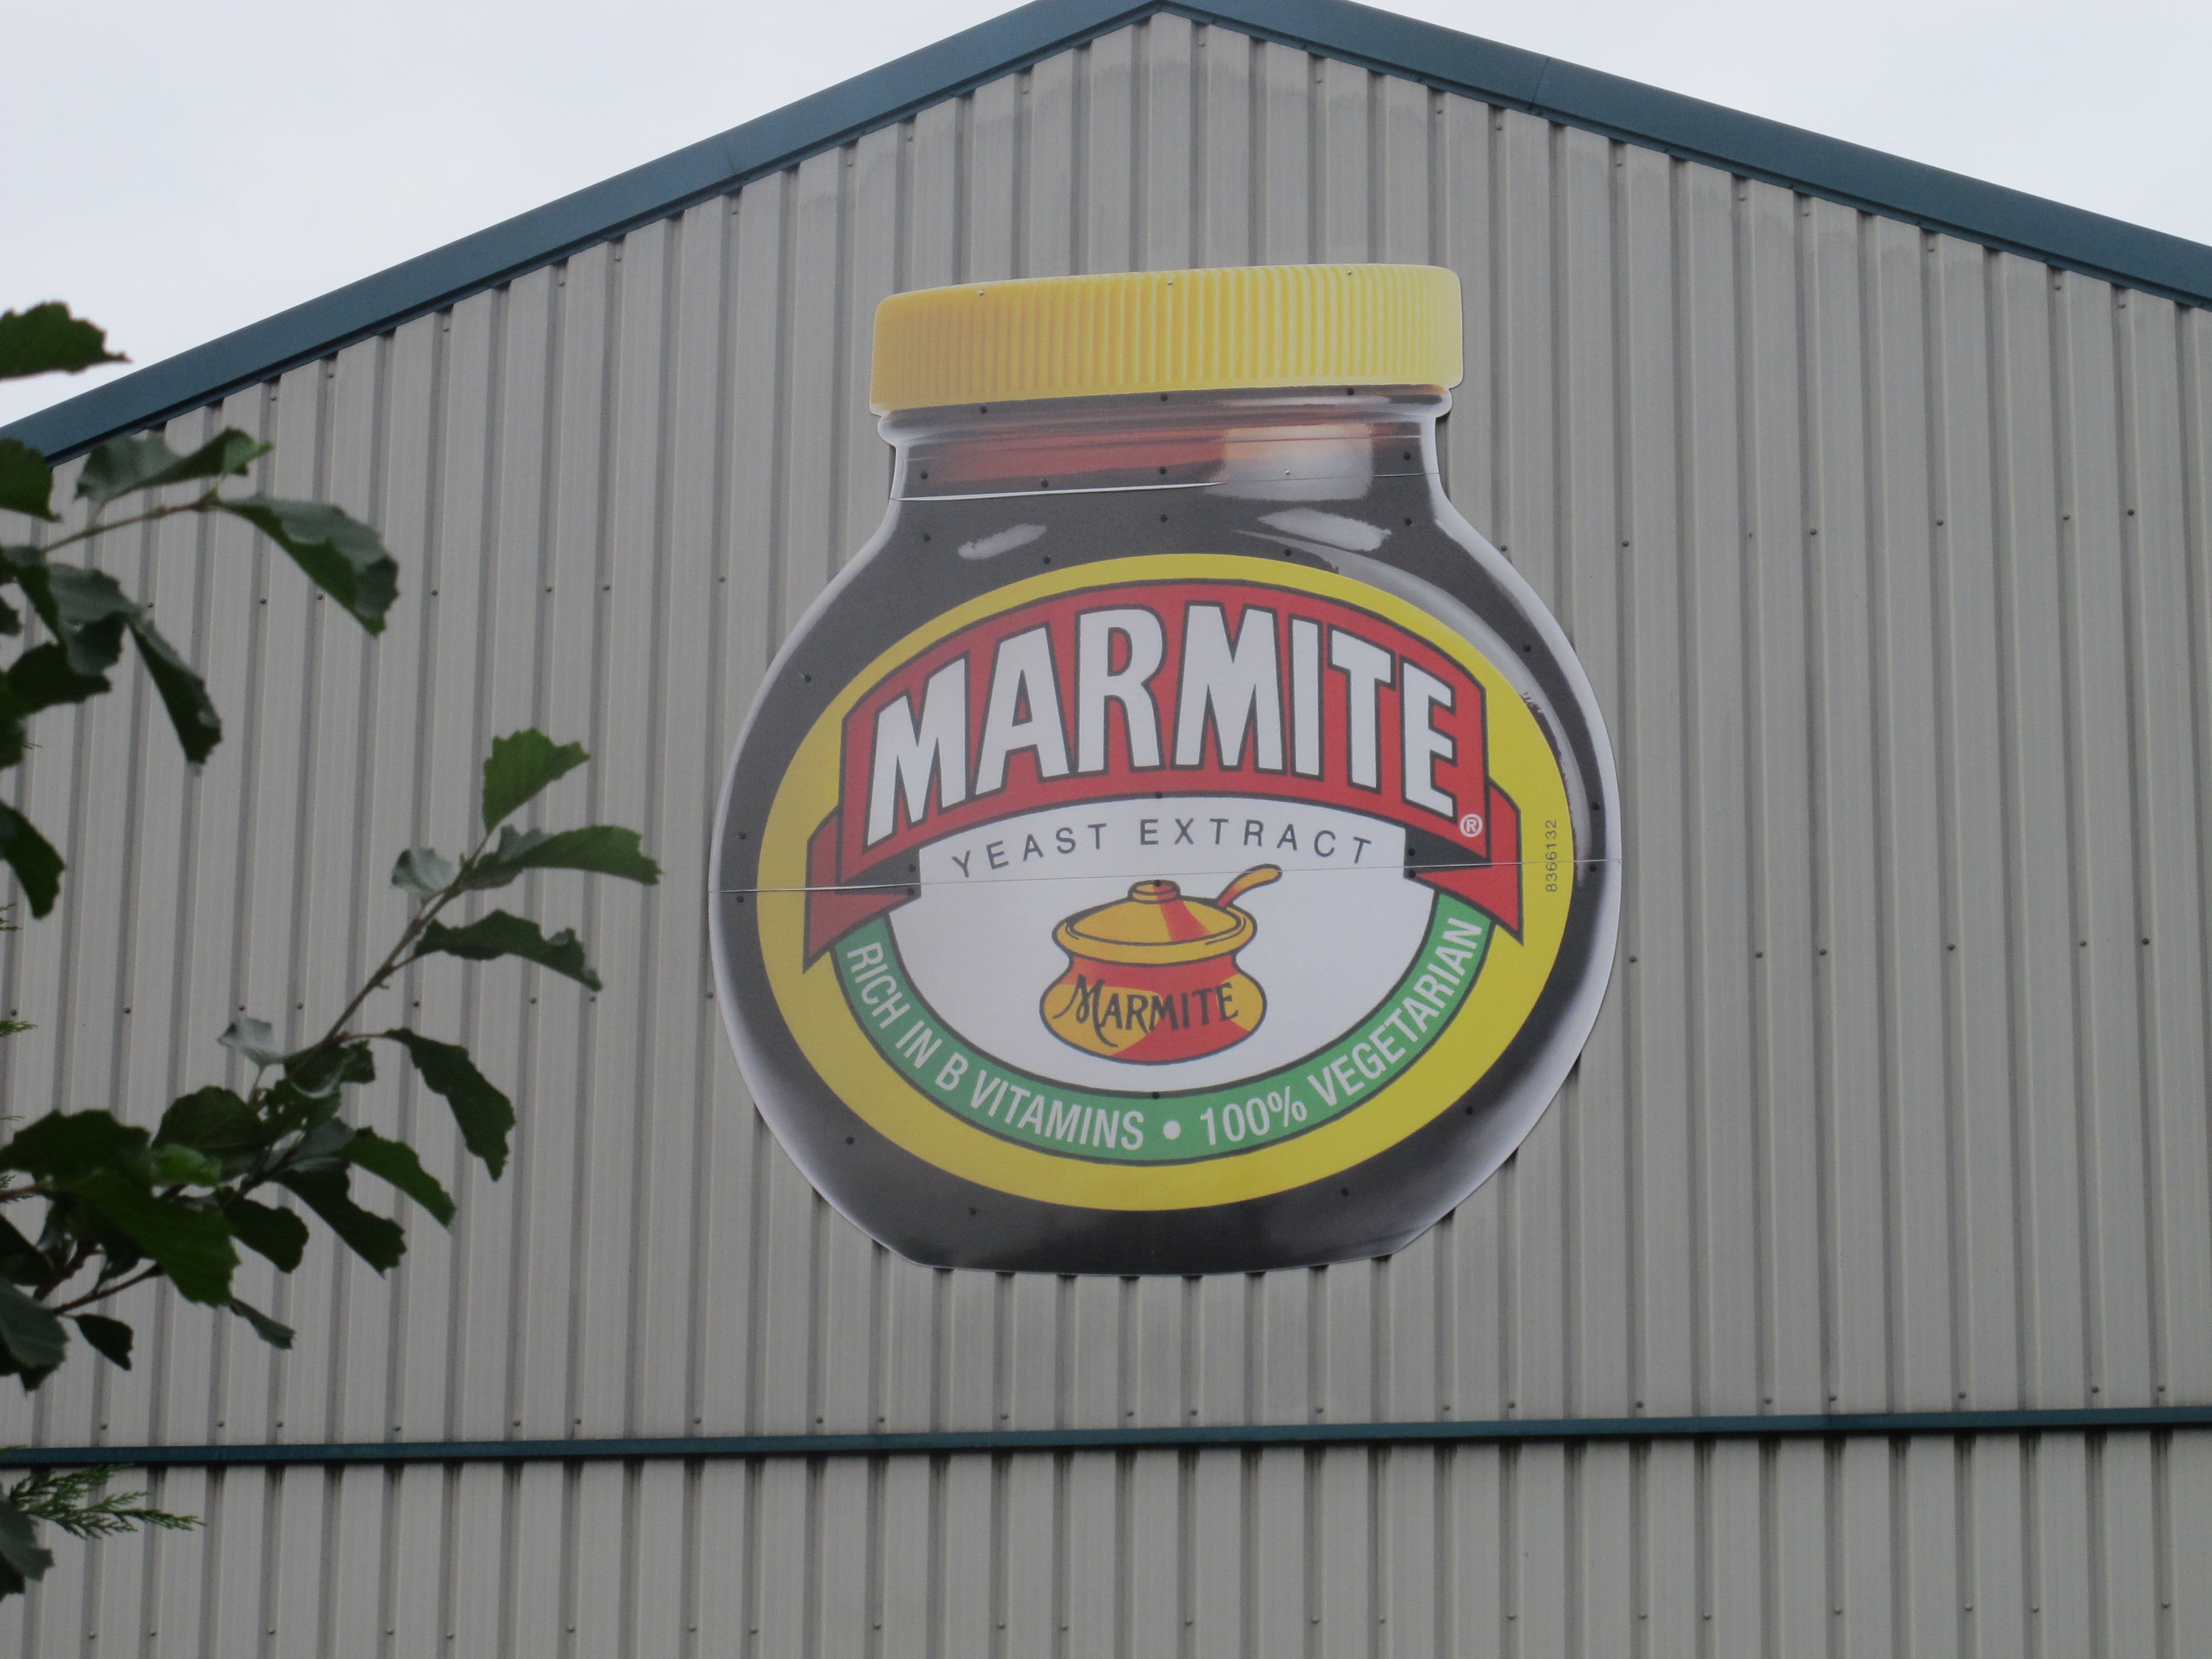 Unilever makes household brands including Marmite and Ben & Jerry’s ice cream (Matthew Cooper/PA)